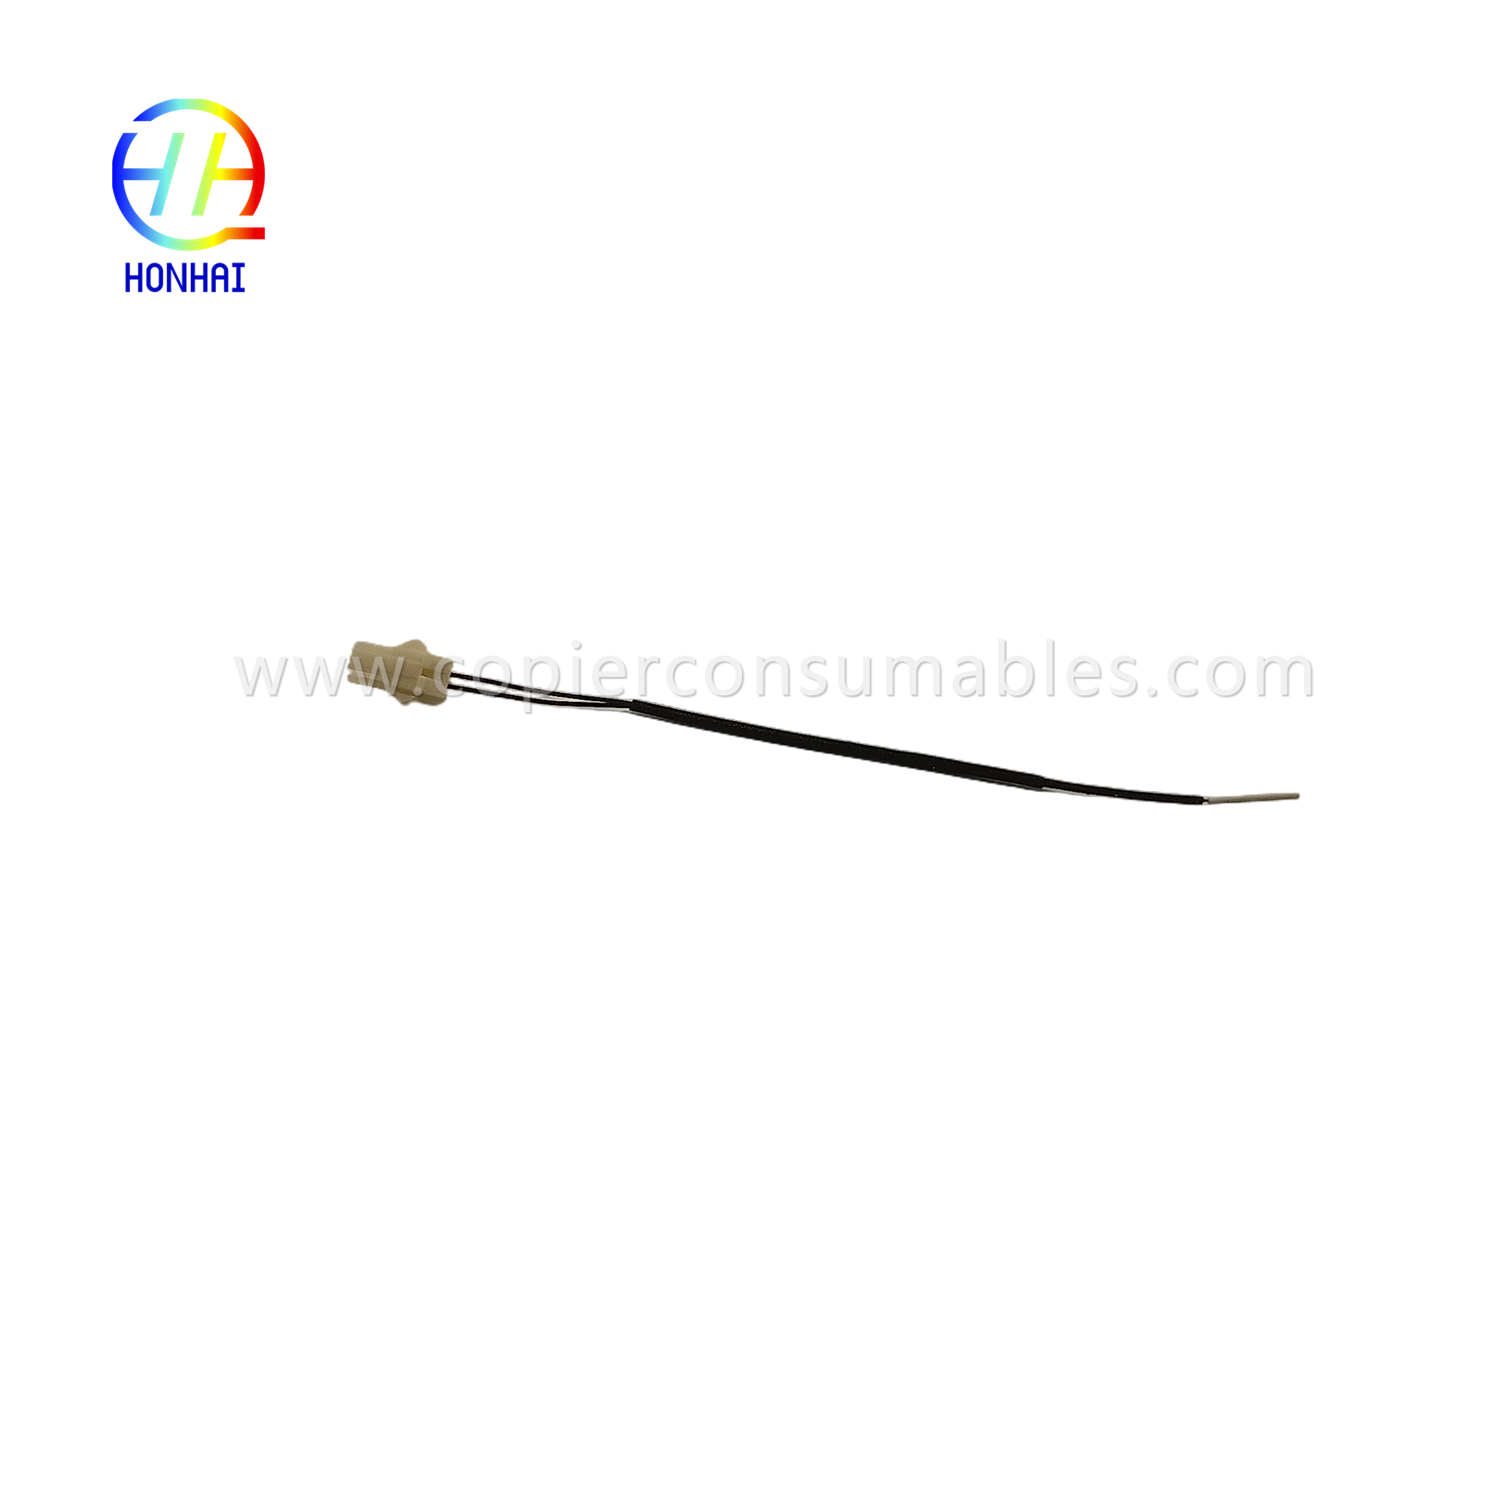 Fuser Thermistor ho an'ny OCE 9400 TDS300 TDS750 PW300 350